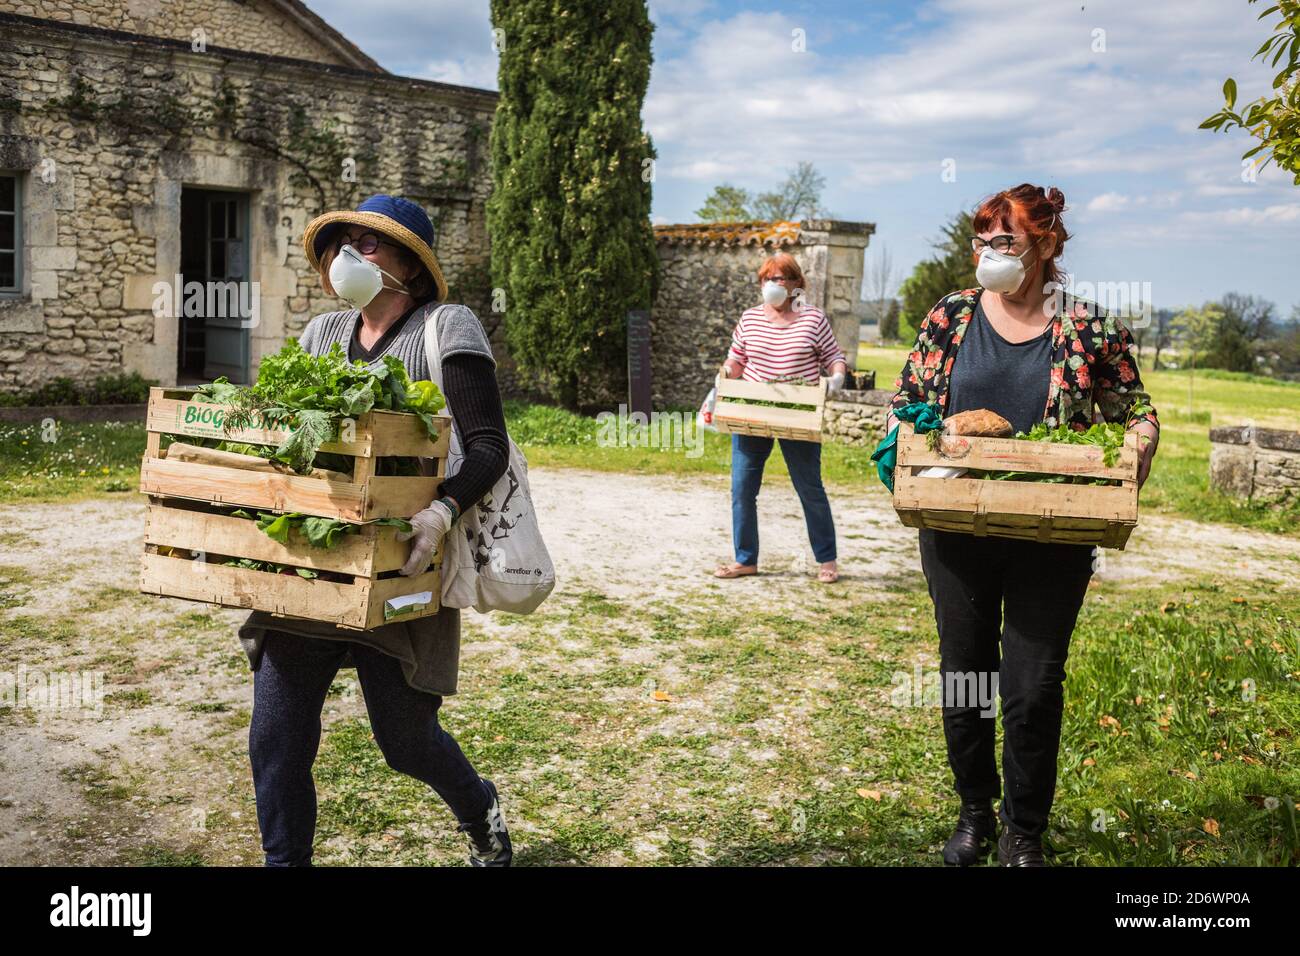 Sale of organic food on the farm during the 2019-nCoV epidemic, Dordogne, France. Stock Photo